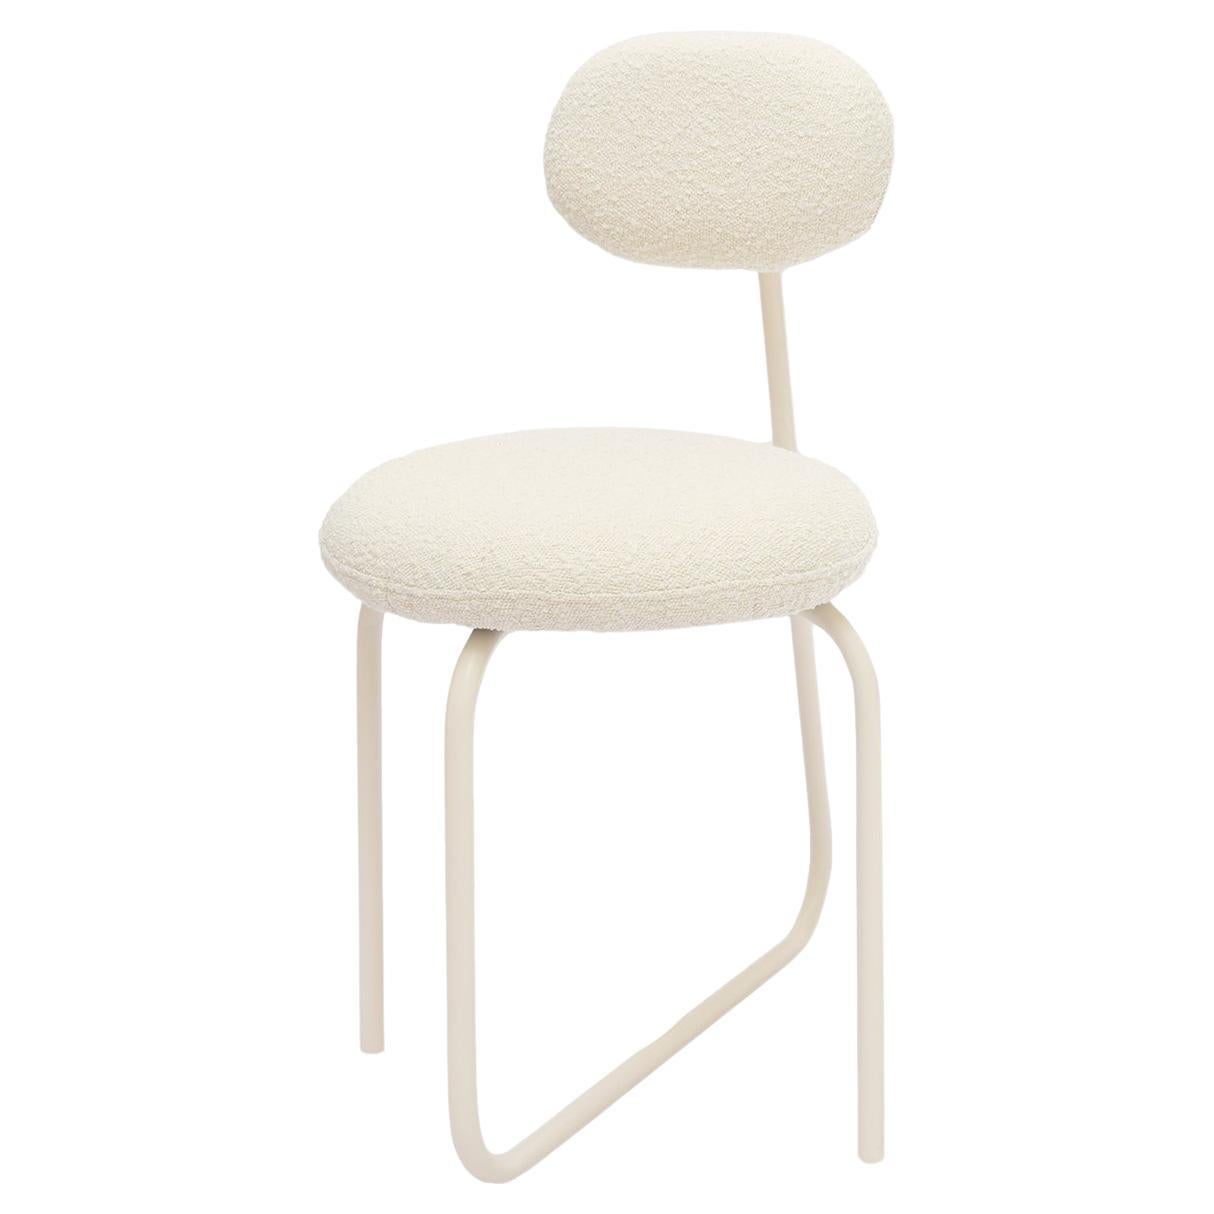 Object 101 Chair by NG Design